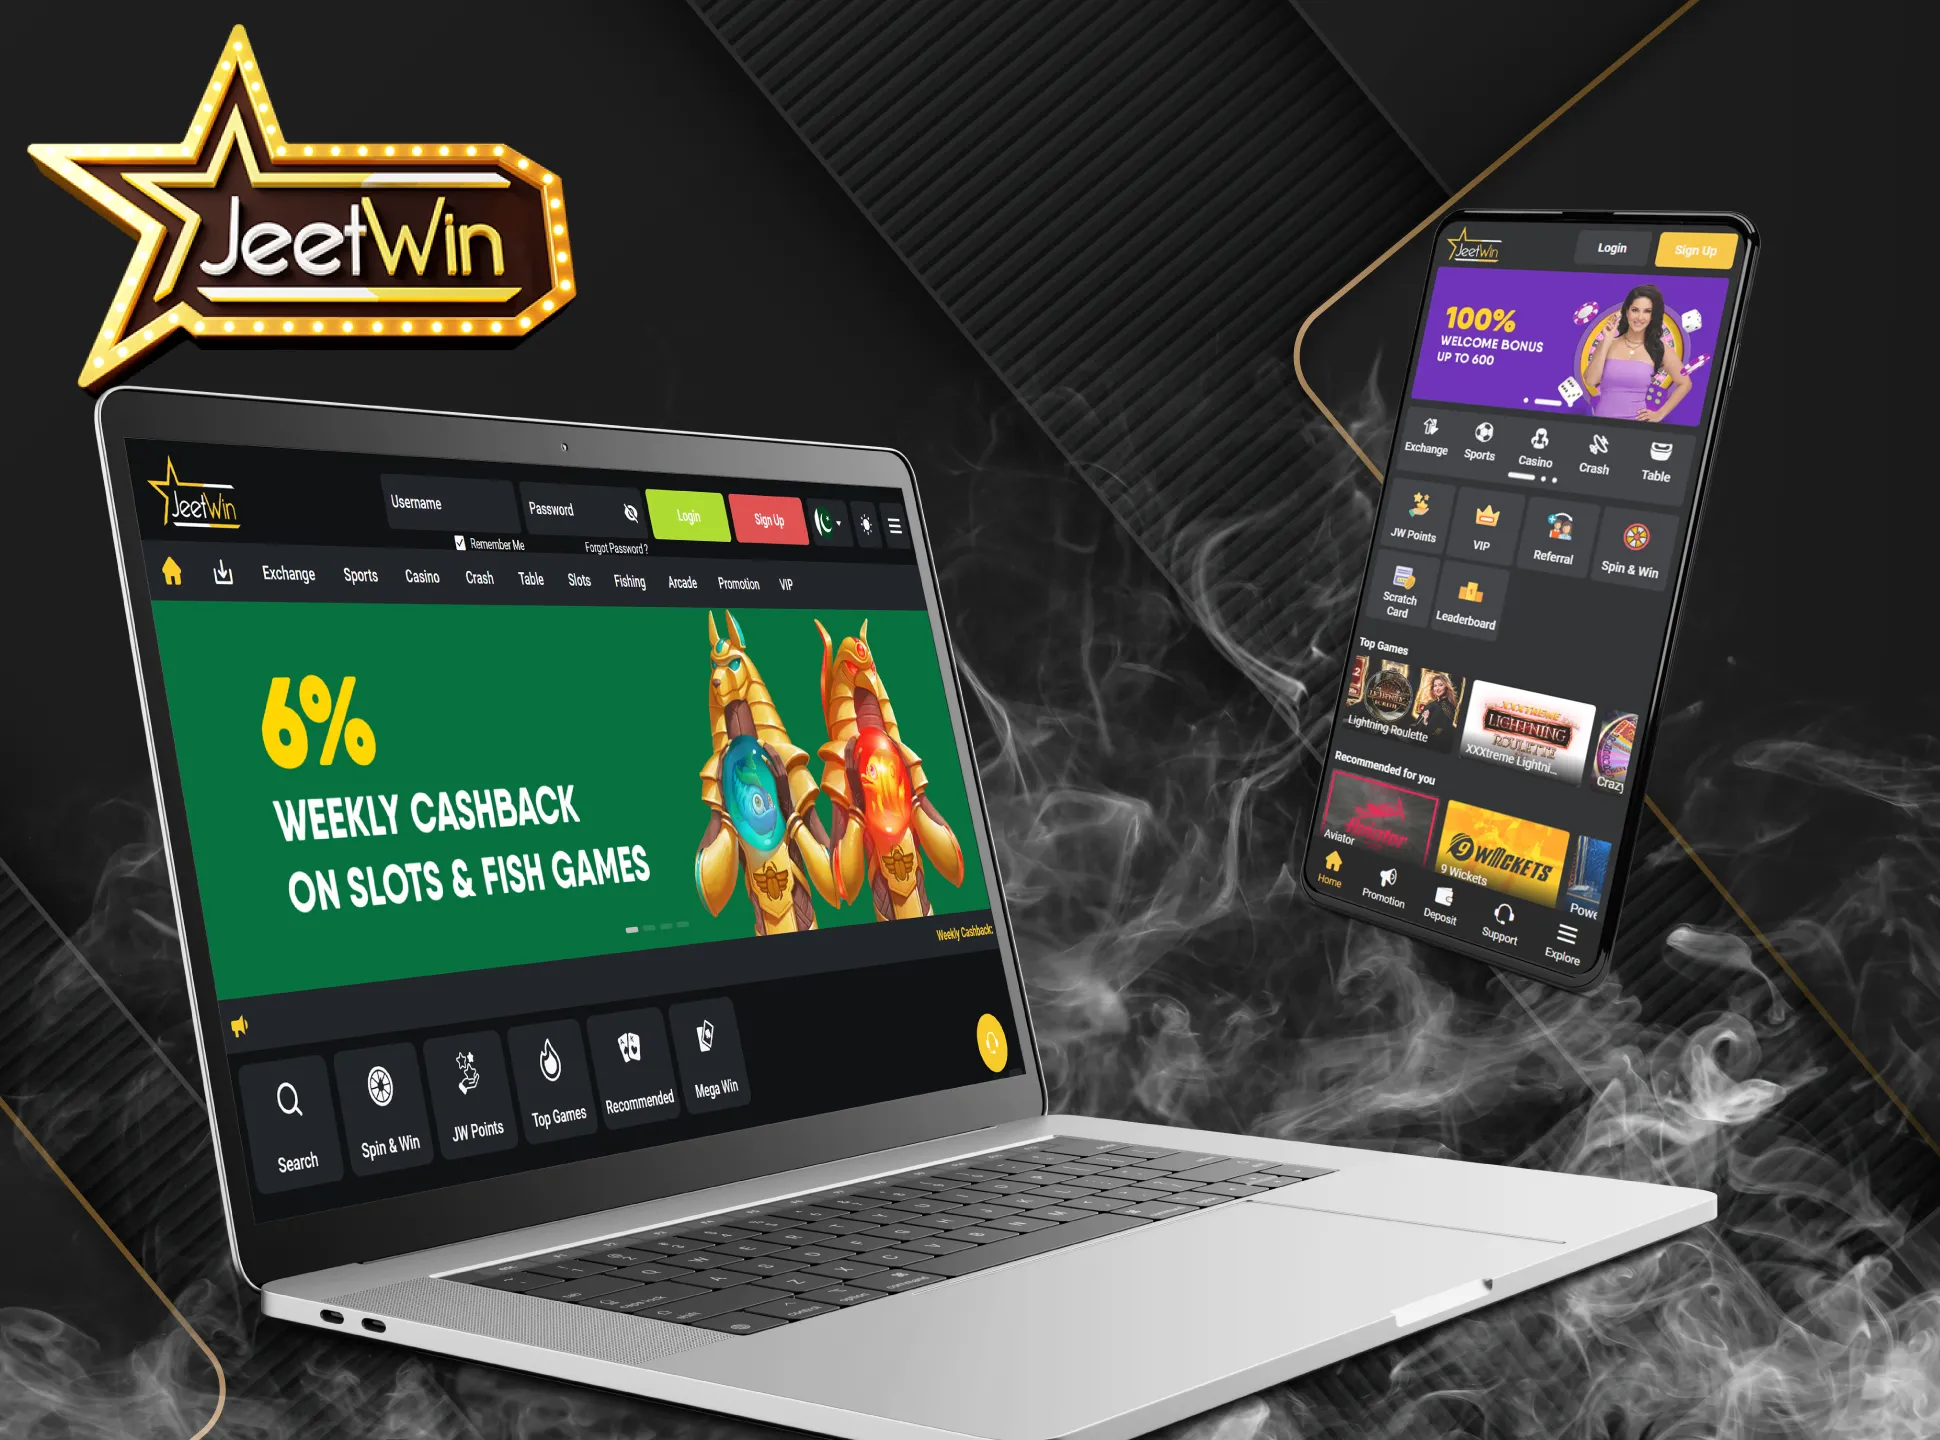 Familiarize yourself with the step-by-step instructions to the JeetWin site's casino games.